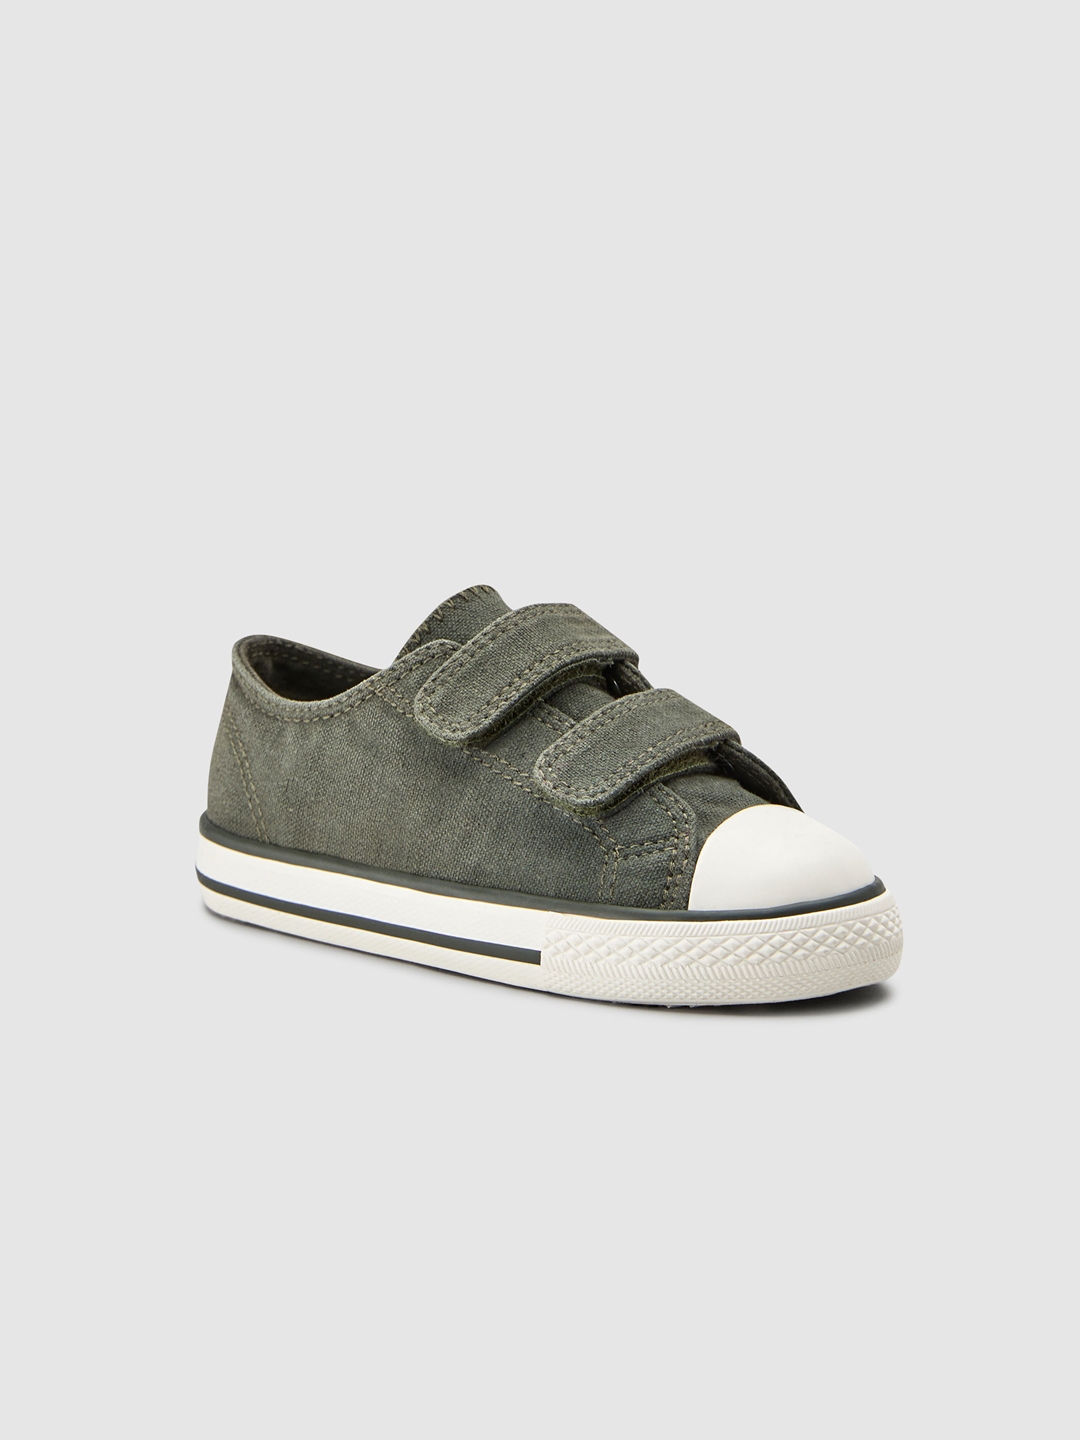 Buy NEXT Boys Olive Green Slip On Sneakers - Casual Shoes for Boys ...